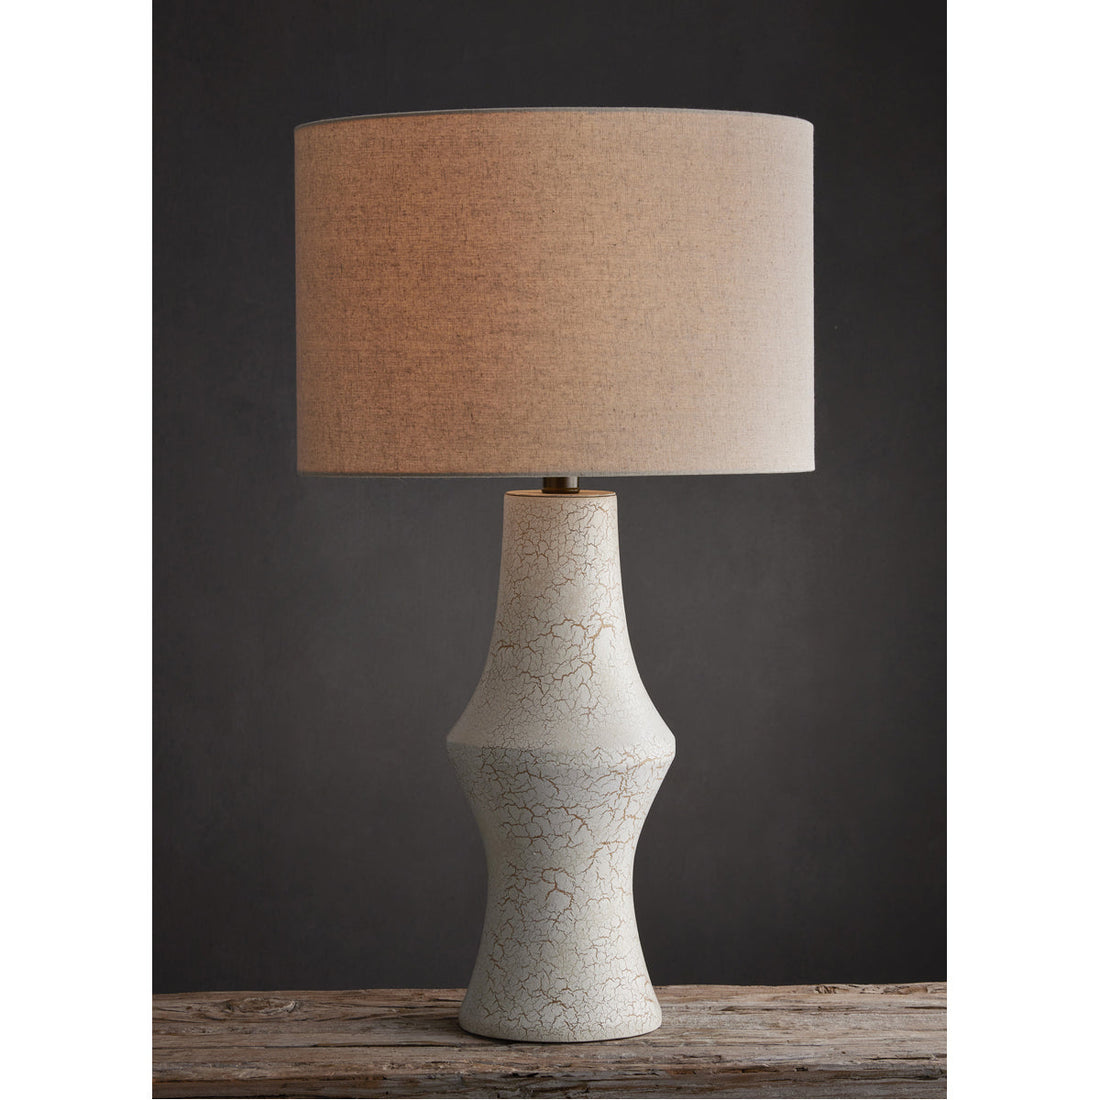 Currey and Company Concerto Table Lamp